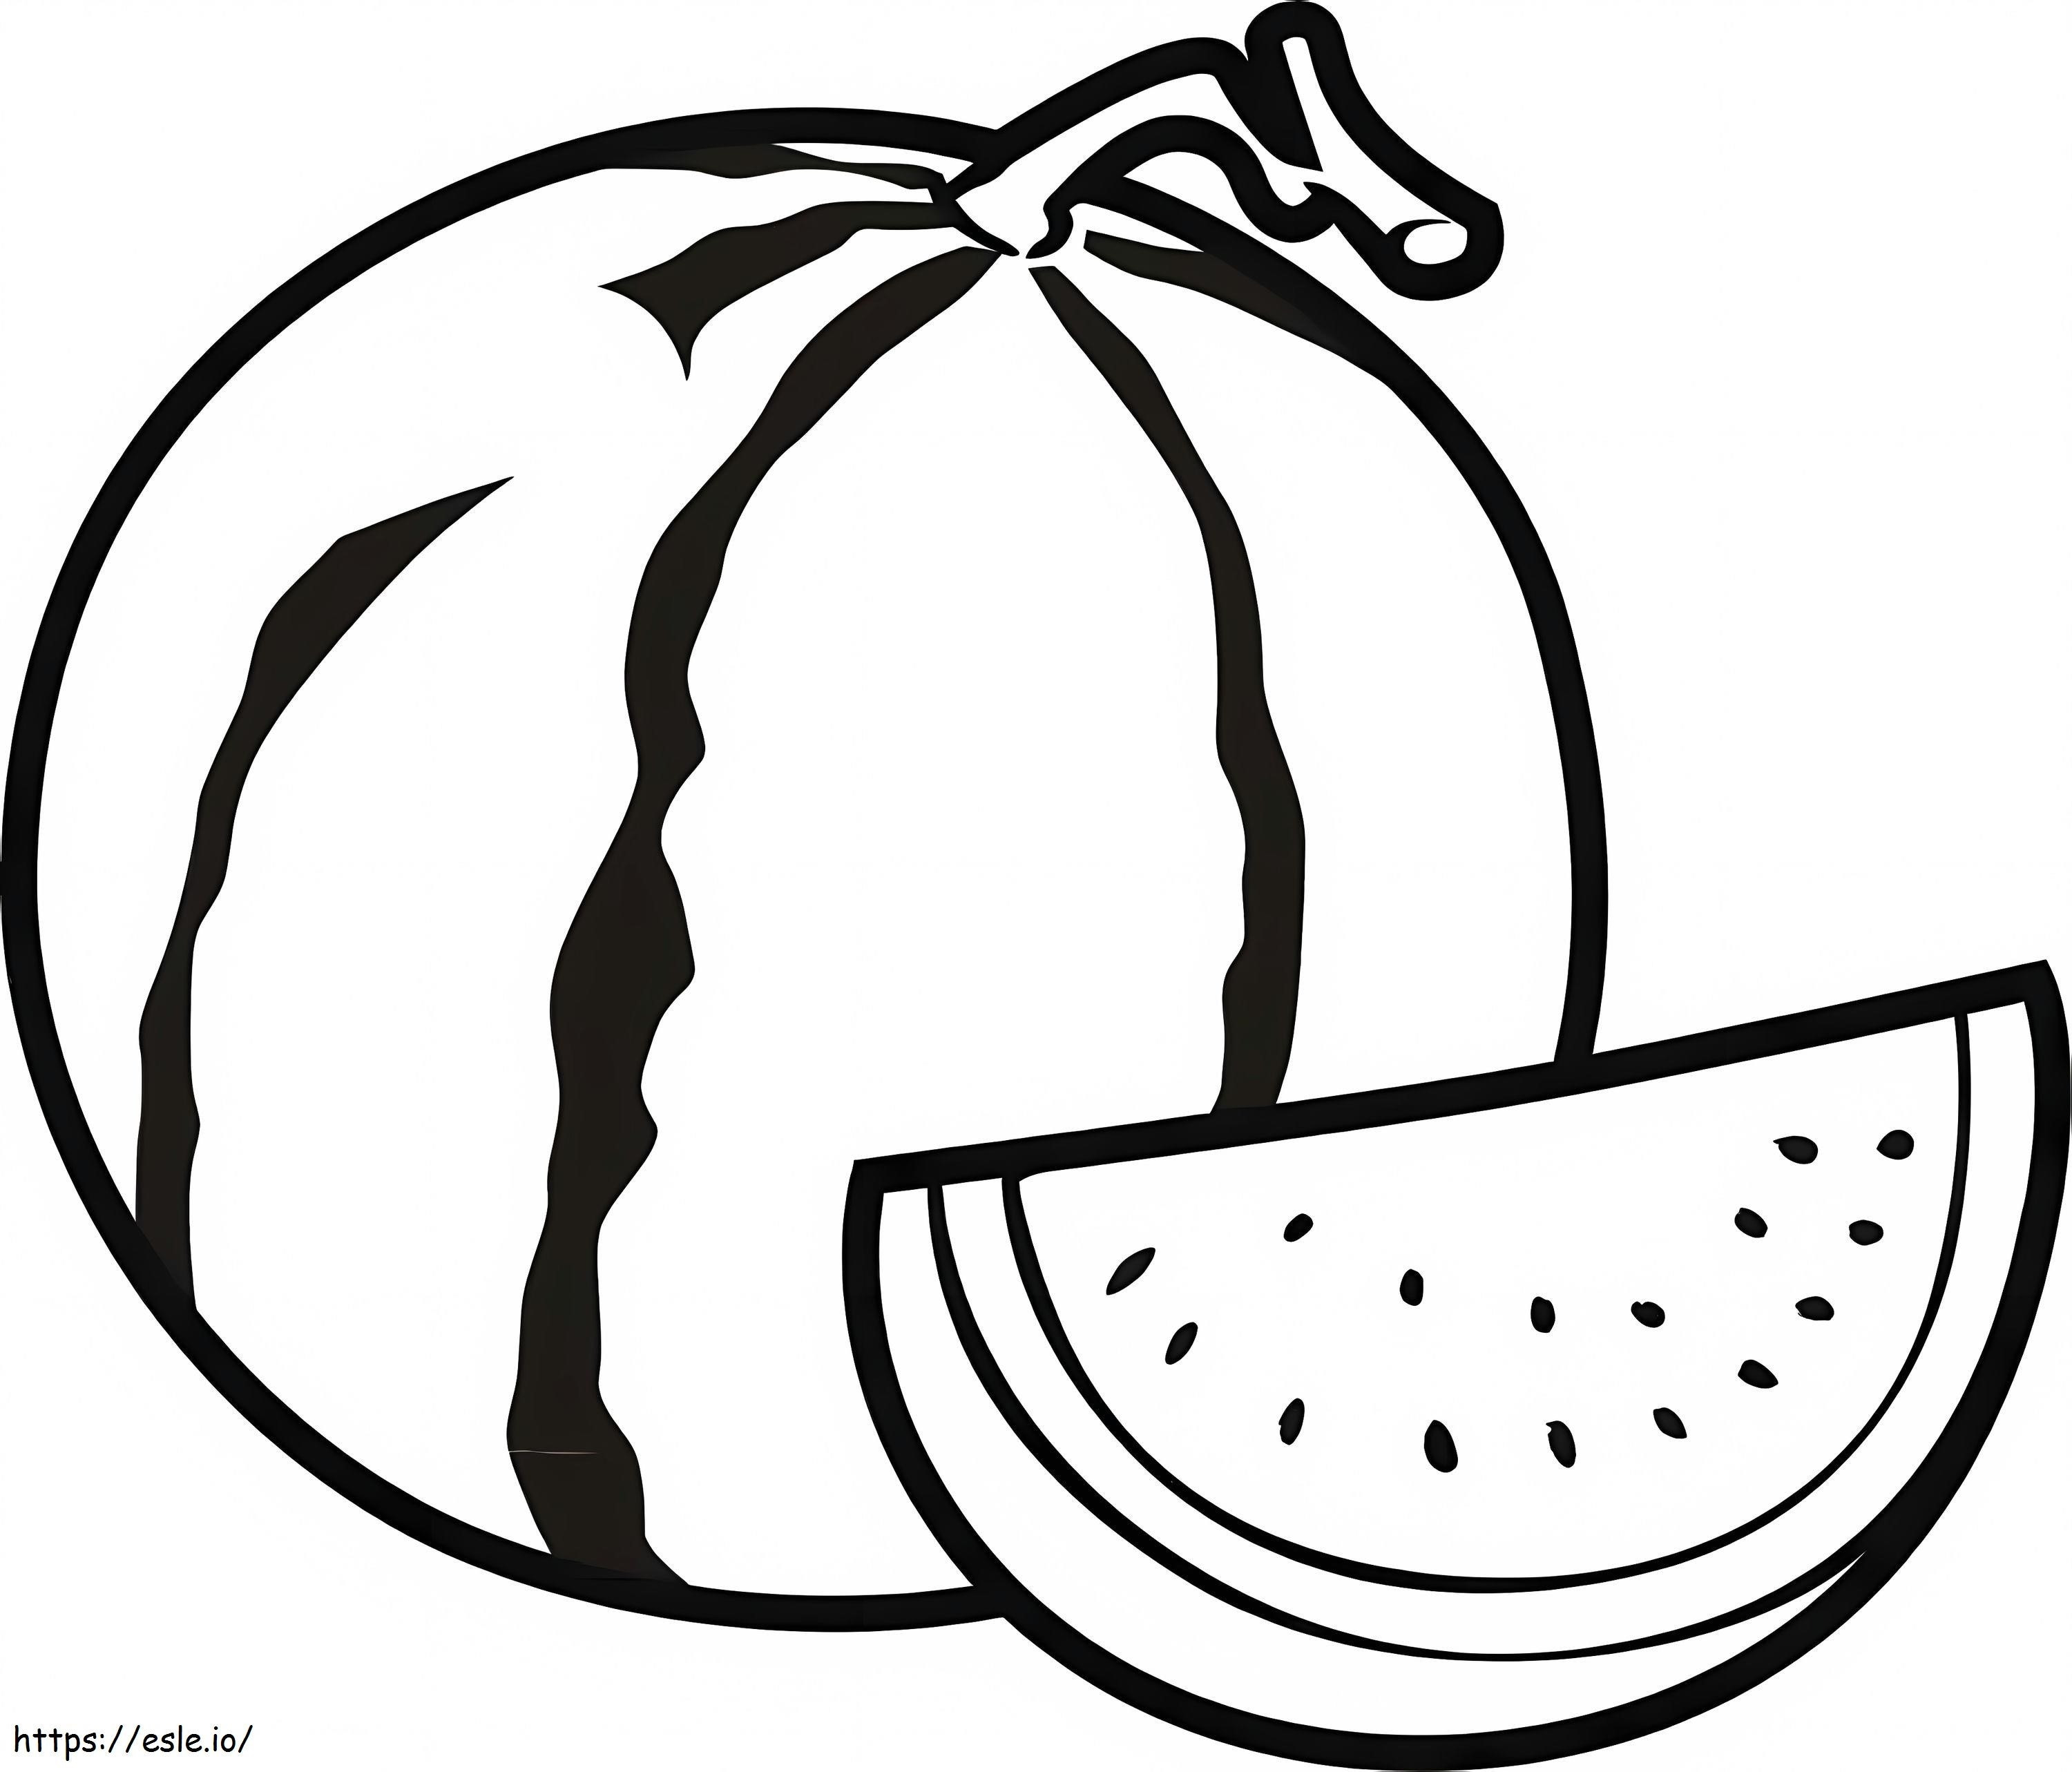 Watermelon Fruits coloring page